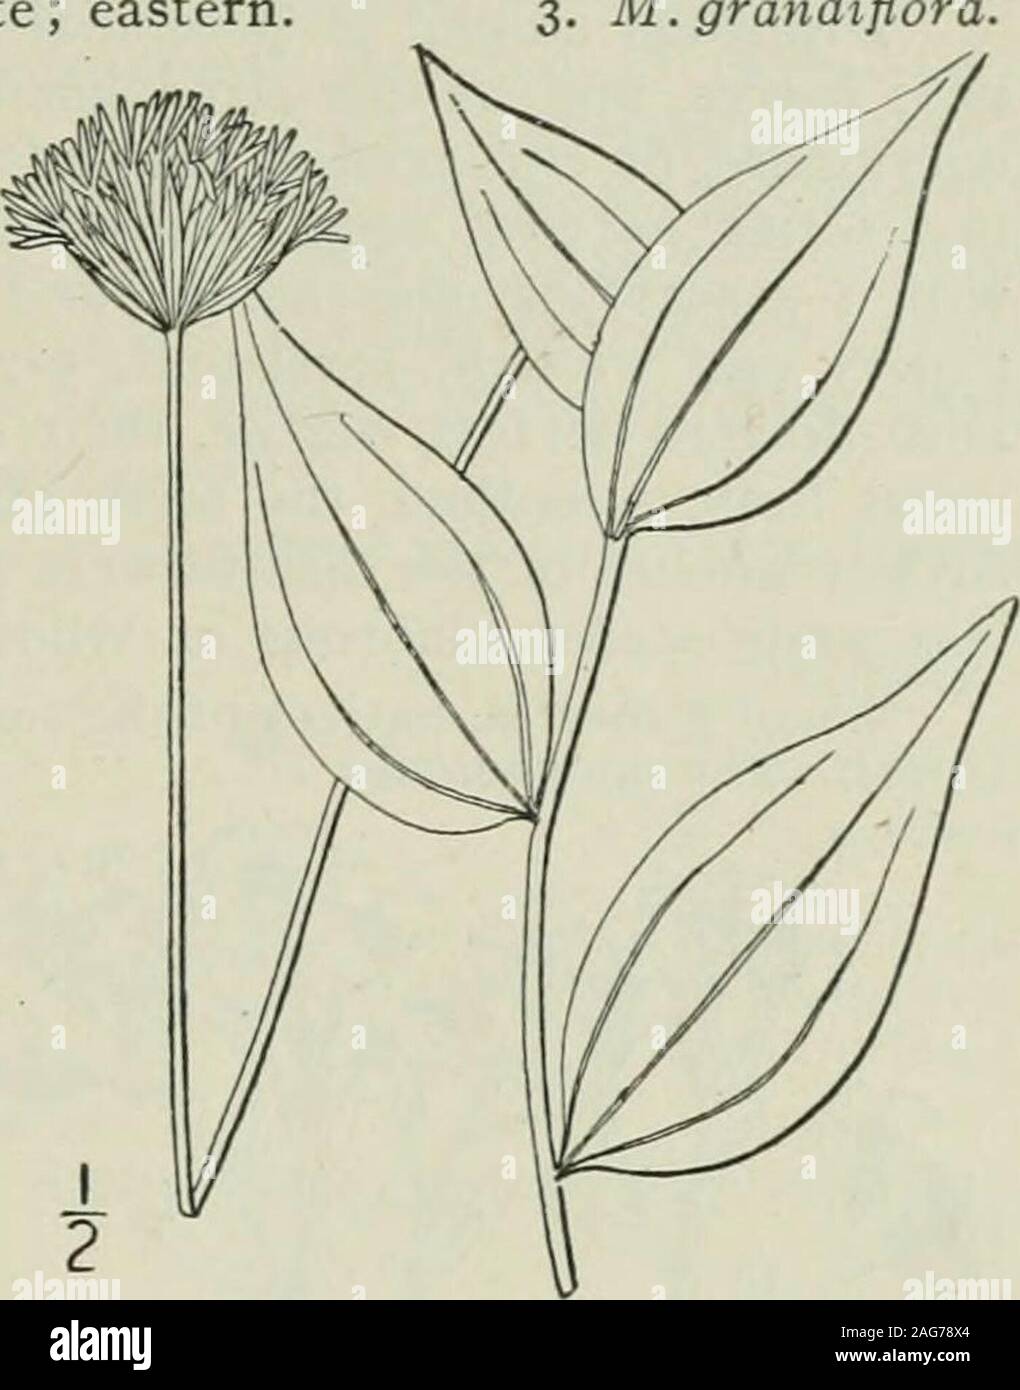 . An illustrated flora of the northern United States, Canada and the British possessions : from Newfoundland to the parallel of the southern boundary of Virginia and from the Atlantic Ocean westward to the 102nd meridian. 2. Marshallia caespitosa Nutt. Xarrow-leaved Marshallia. Fig. 4525.Marshallia caespitosa Nutt.; DC. Prodr. 5: 680. 1836. Stems usually tufted and simple, sometimes sparinglybranched, leafy either only near the base or to beyondthe middle, 8-i5 high. Leaves thick, mostly basal,faintly 3-nerved, linear or linear-spatulate, obtuse, some-times 4 long and 3 wide, the upper ones li Stock Photo